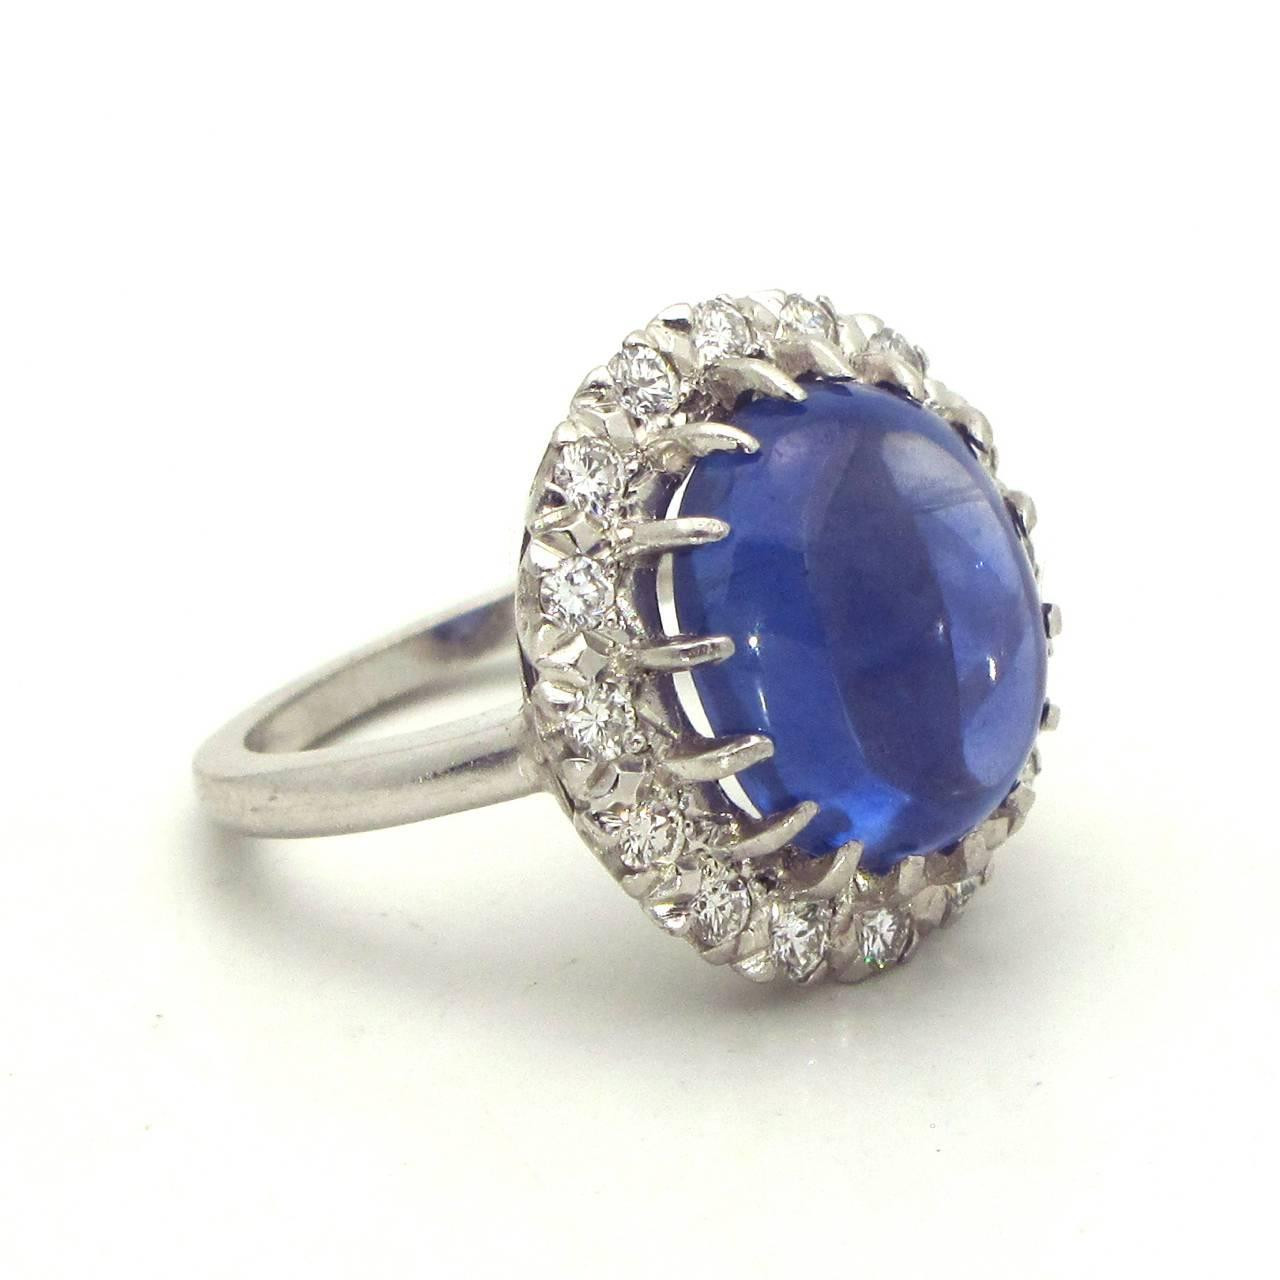 Blue Diamond Rings For Sale
 Blue Sapphire Diamond Platinum Cluster Ring For Sale at